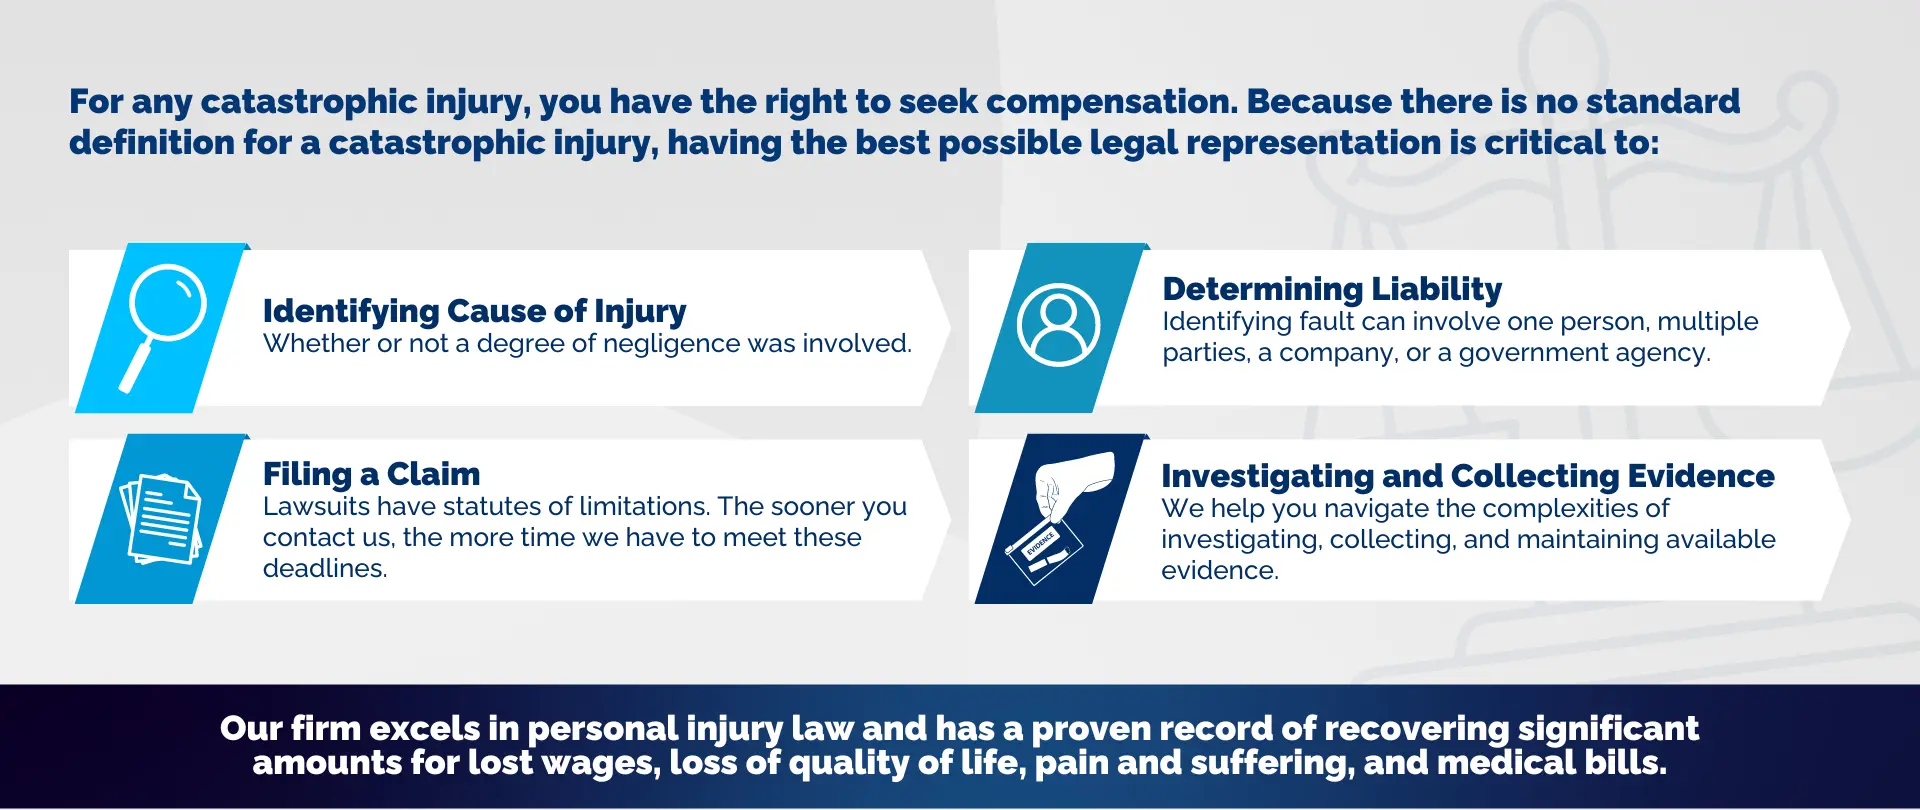 Infographic outlining some of the legal considerations of a catastrophic injury case. These include 'Identifying Cause of Injury,' 'Determining Liability,' 'Filing a Claim' and 'Investigating and Collecting Evidence'